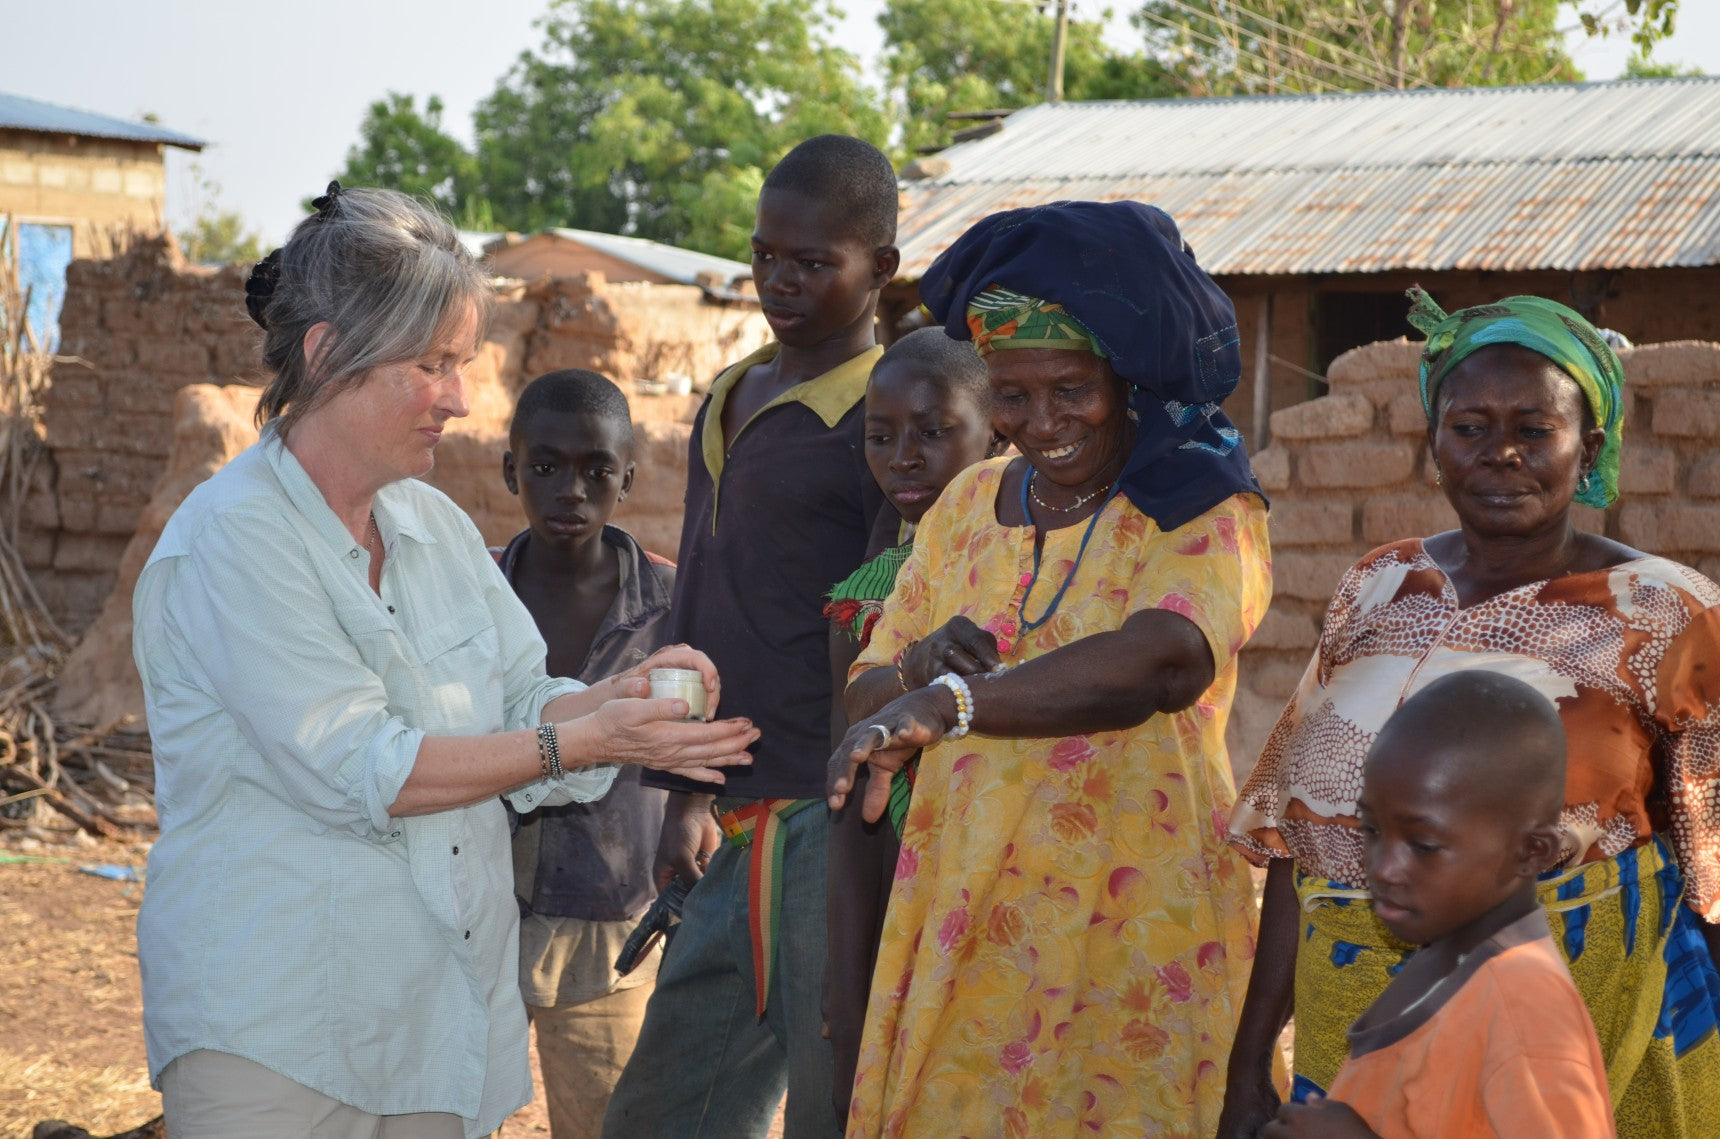 evan healy sharing whipped shea butter with kperisi village woman